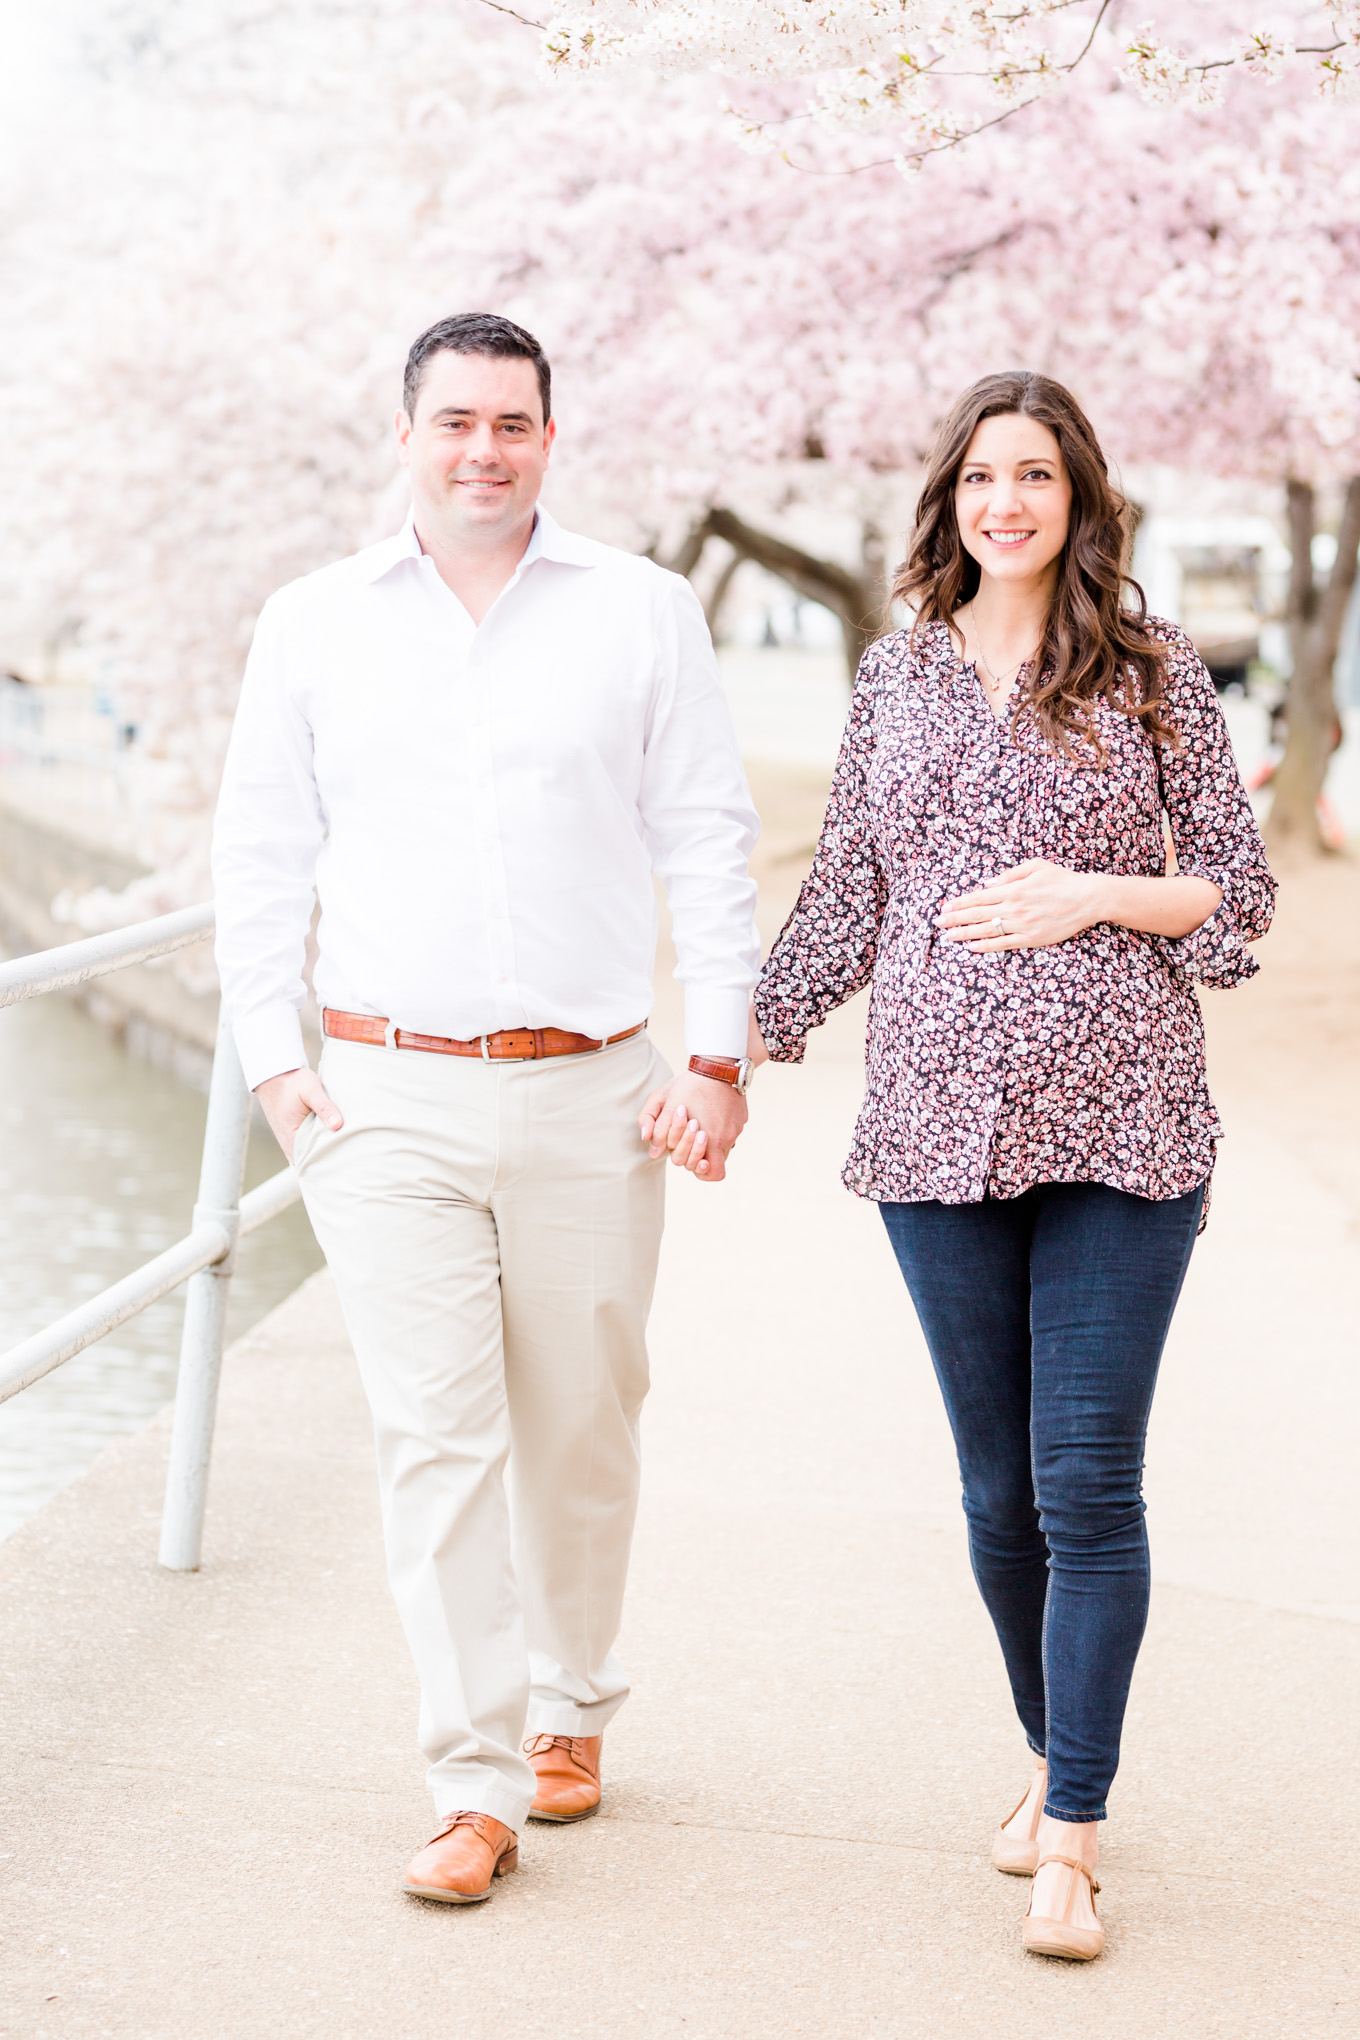 D.C. cherry blossoms maternity session, expectant couple, D.C. couple, maternity photos, maternity portraits, spring maternity photos, cherry blossoms, D.C. cherry blossoms, tidal basin, couple walking, couple holding hands, brunette mom to be, brunette woman, floral print top, dark wash blue jeans, 